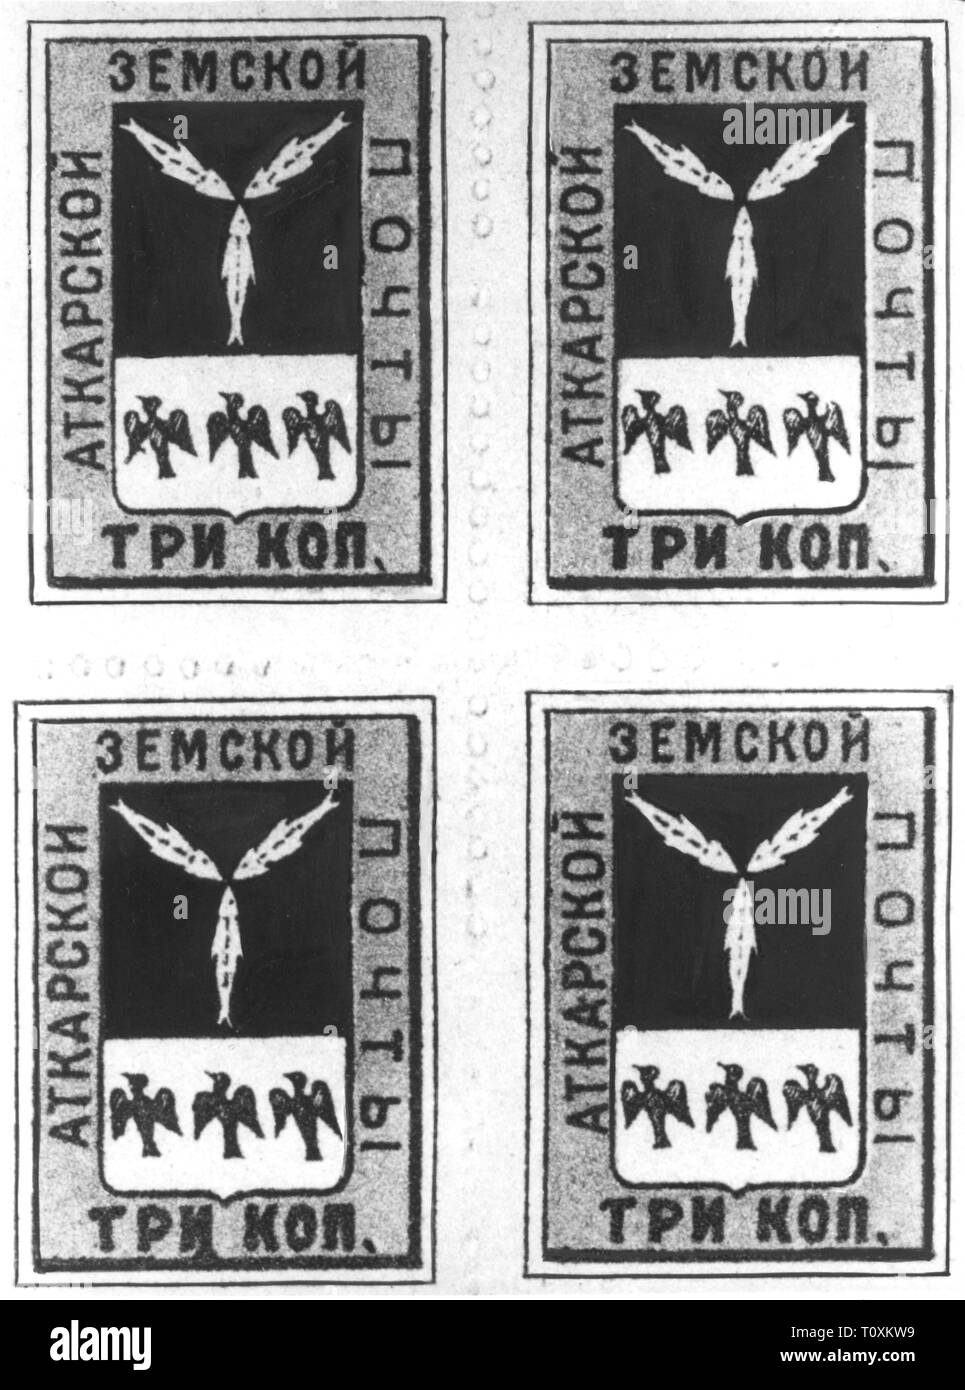 mail, postage stamps, Russia, 3 kopeks postage stamps of the zemstvo Atkarsk, date of issue: circa 1870, Additional-Rights-Clearance-Info-Not-Available Stock Photo